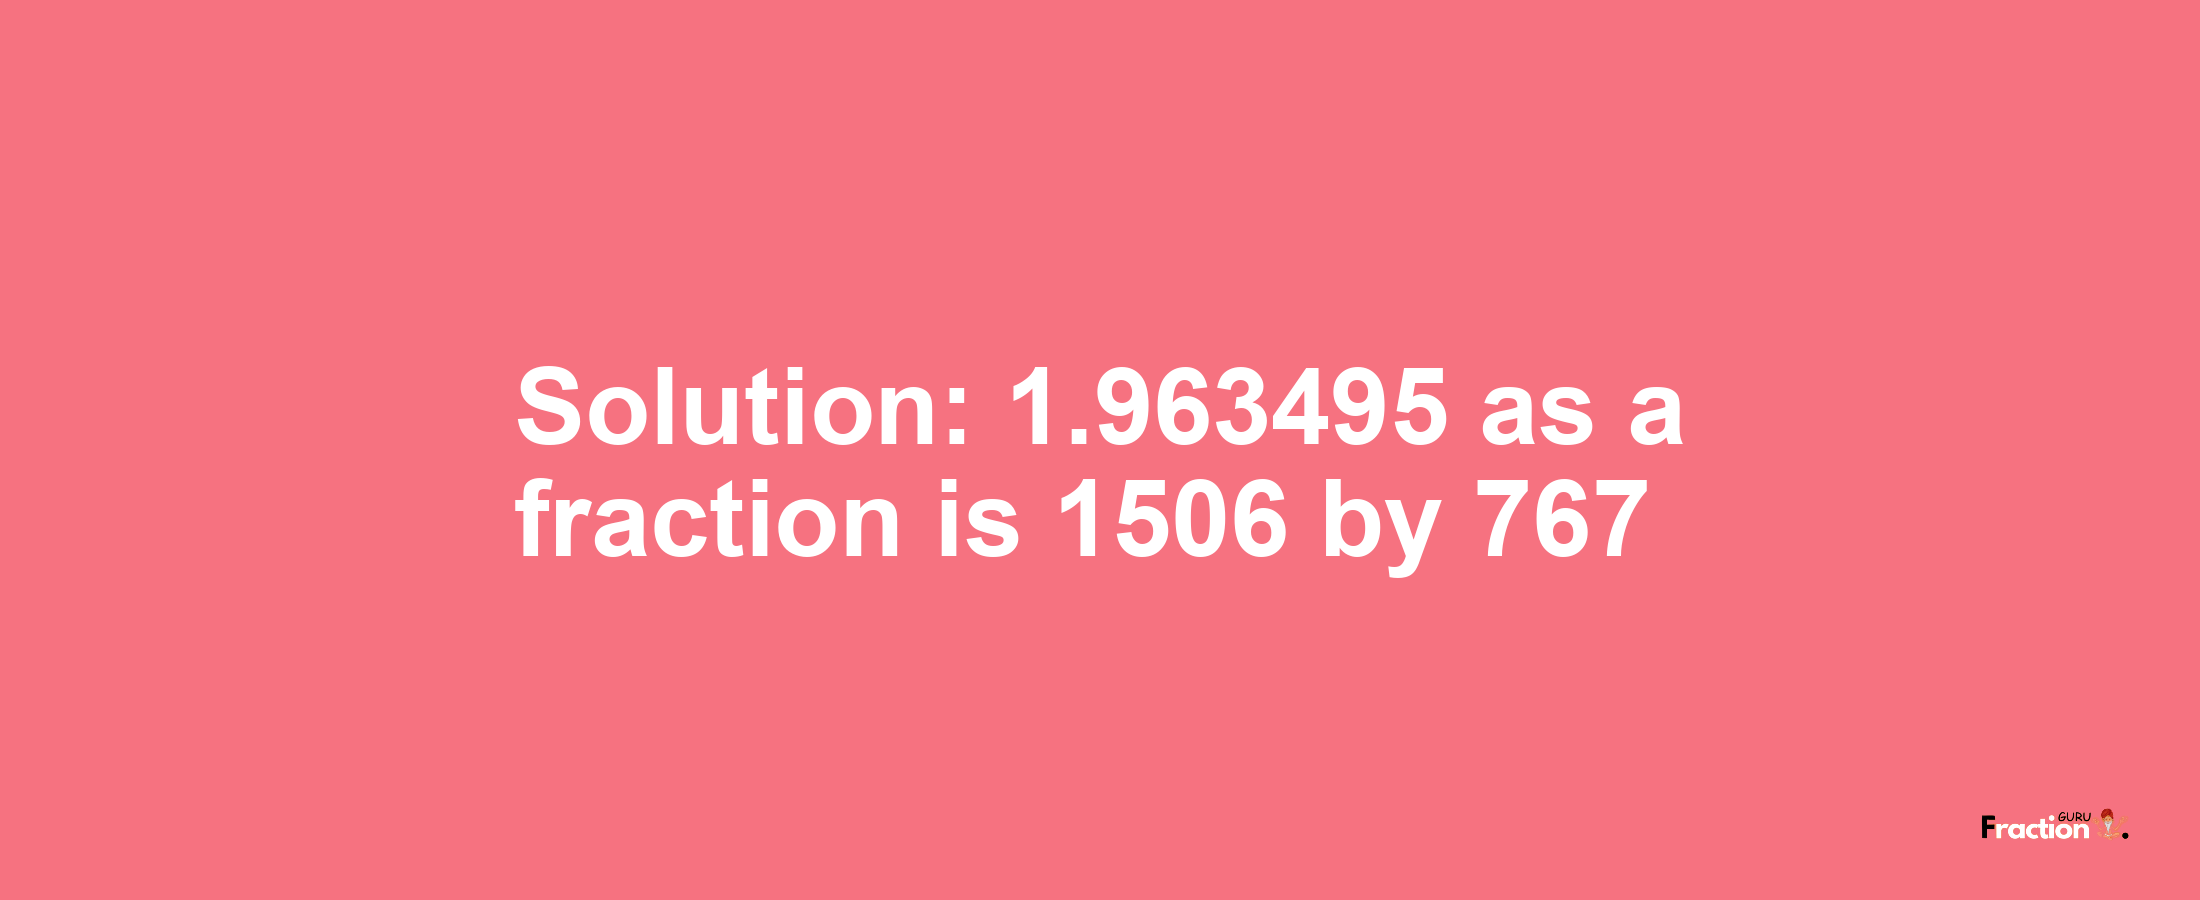 Solution:1.963495 as a fraction is 1506/767